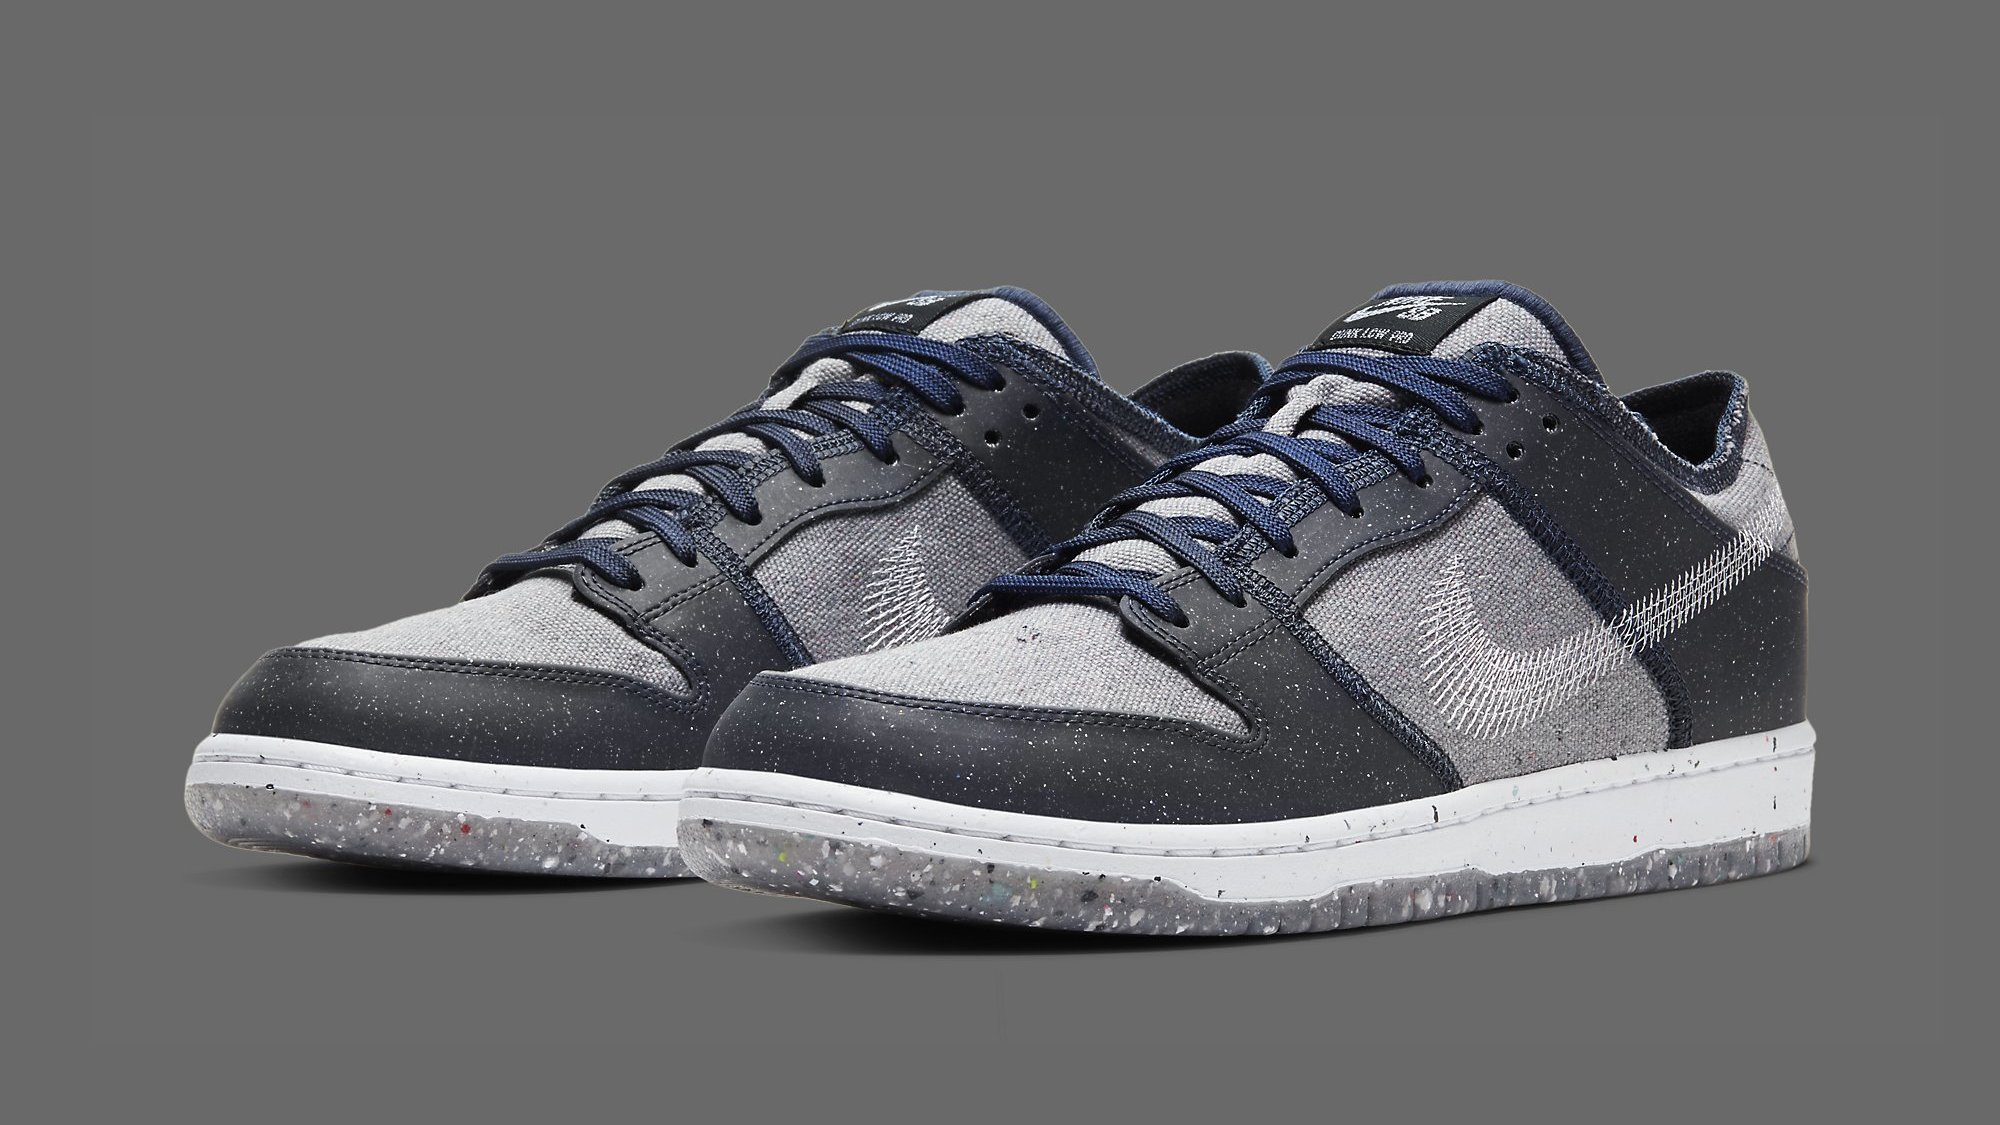 This Nike SB Is Made Materials | Complex